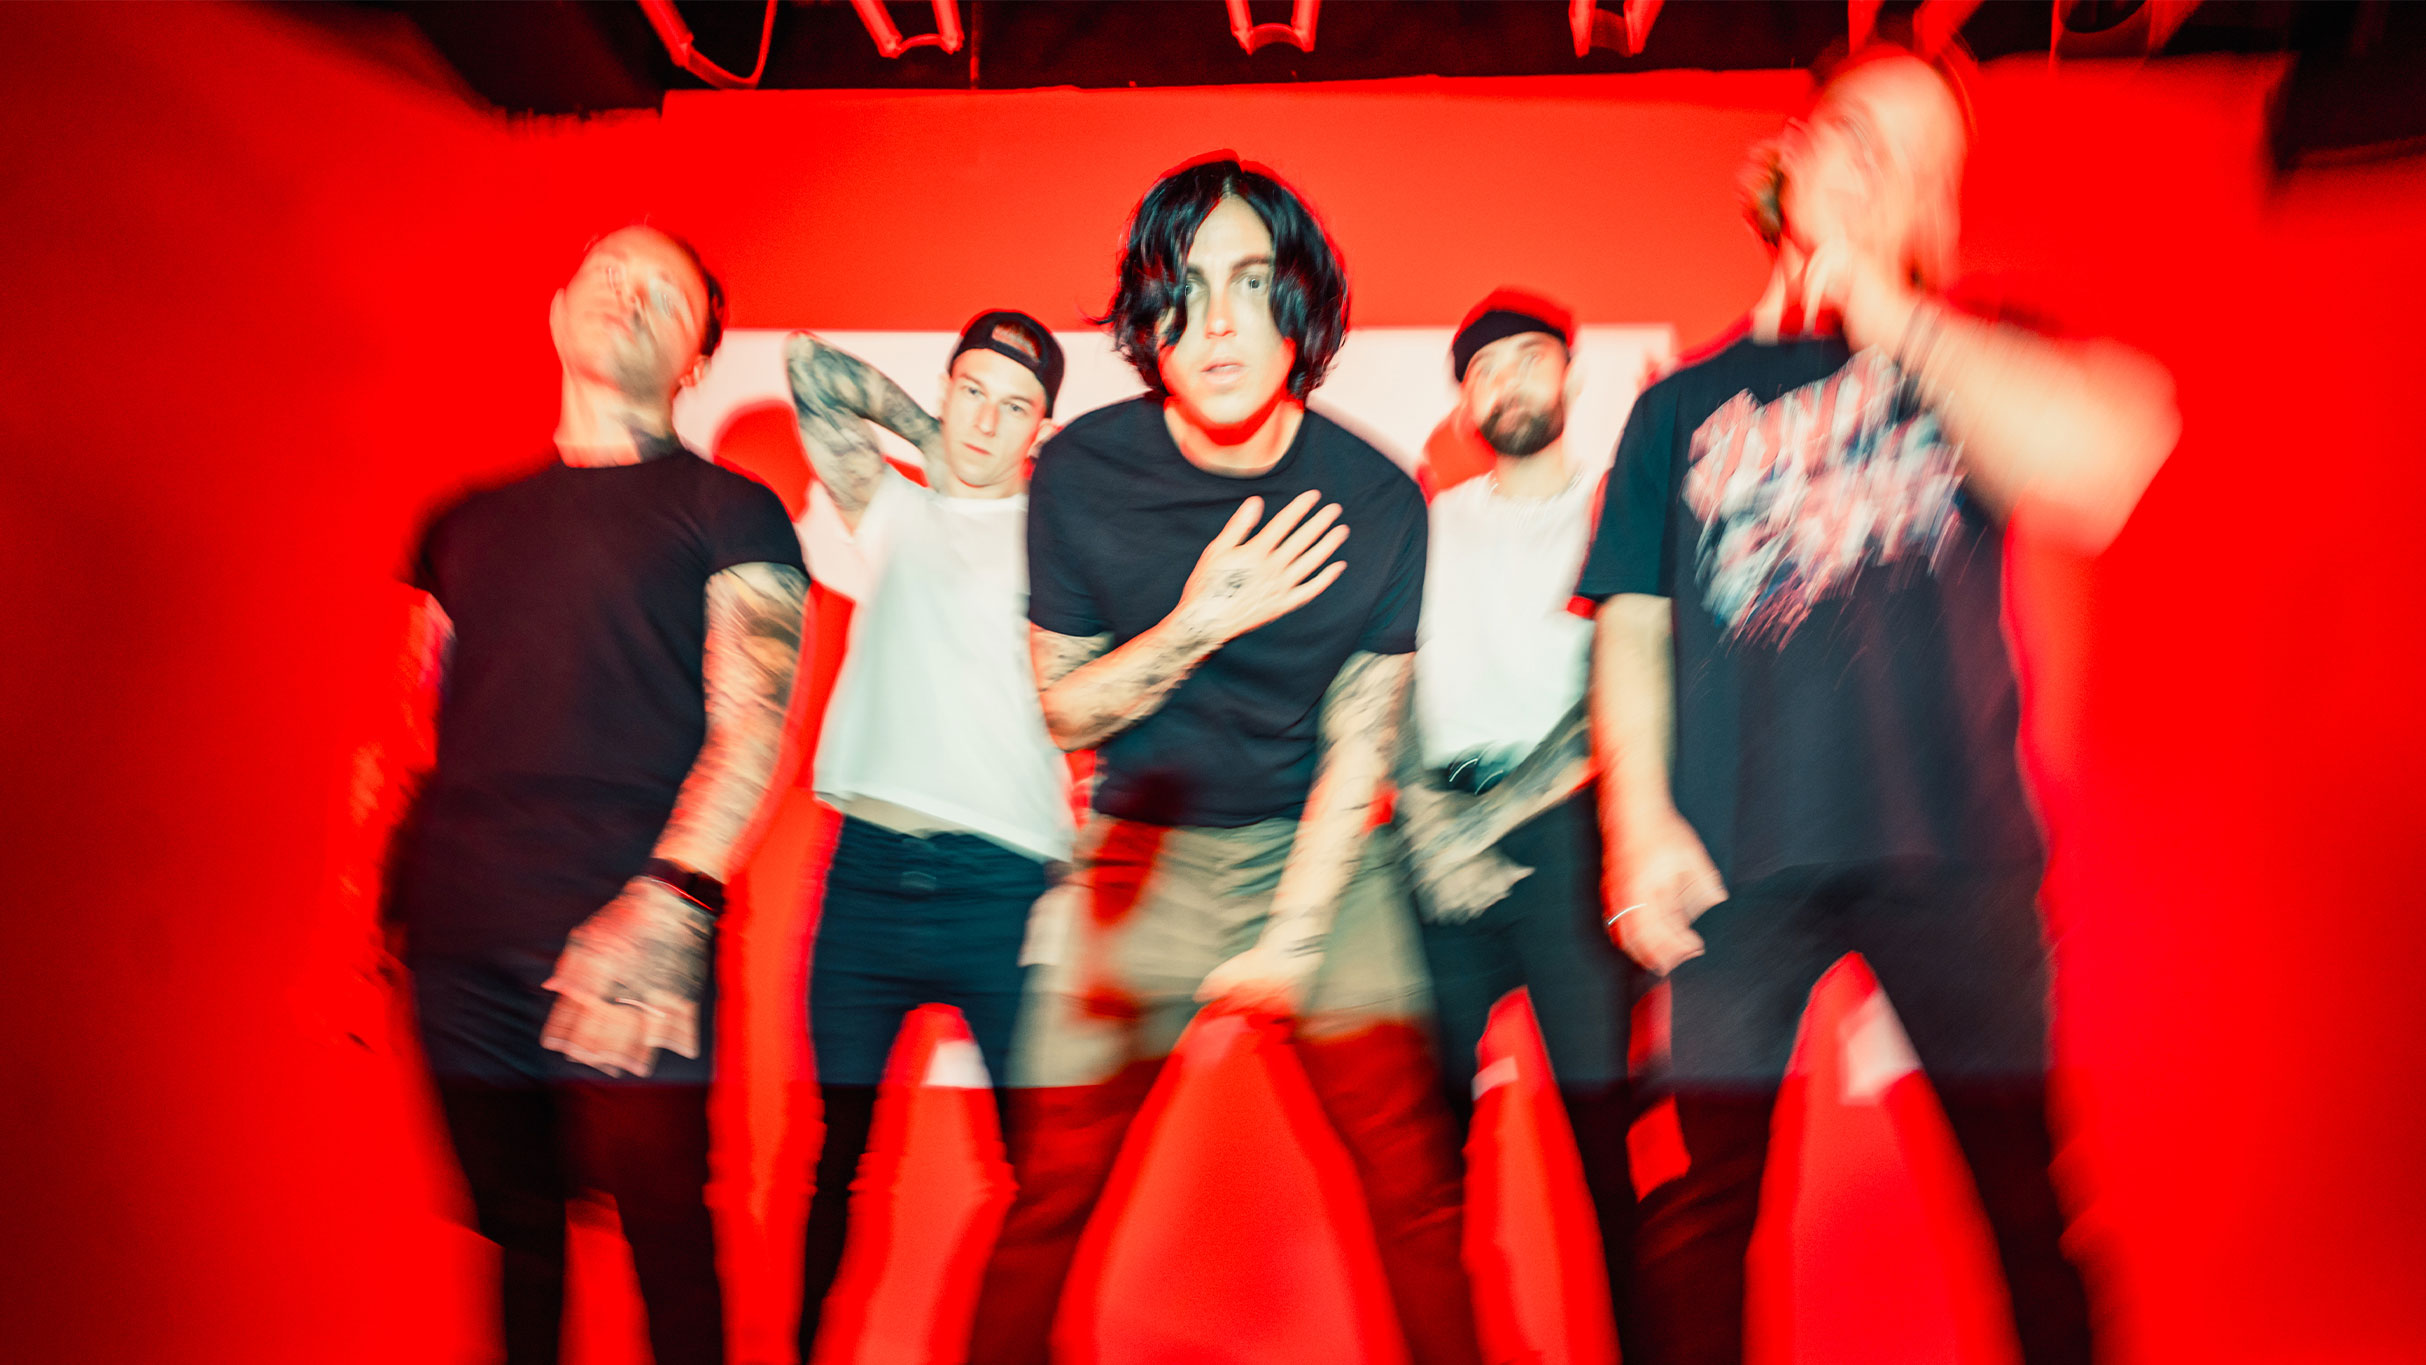 Sleeping With Sirens - Let's Cheers to This Tour